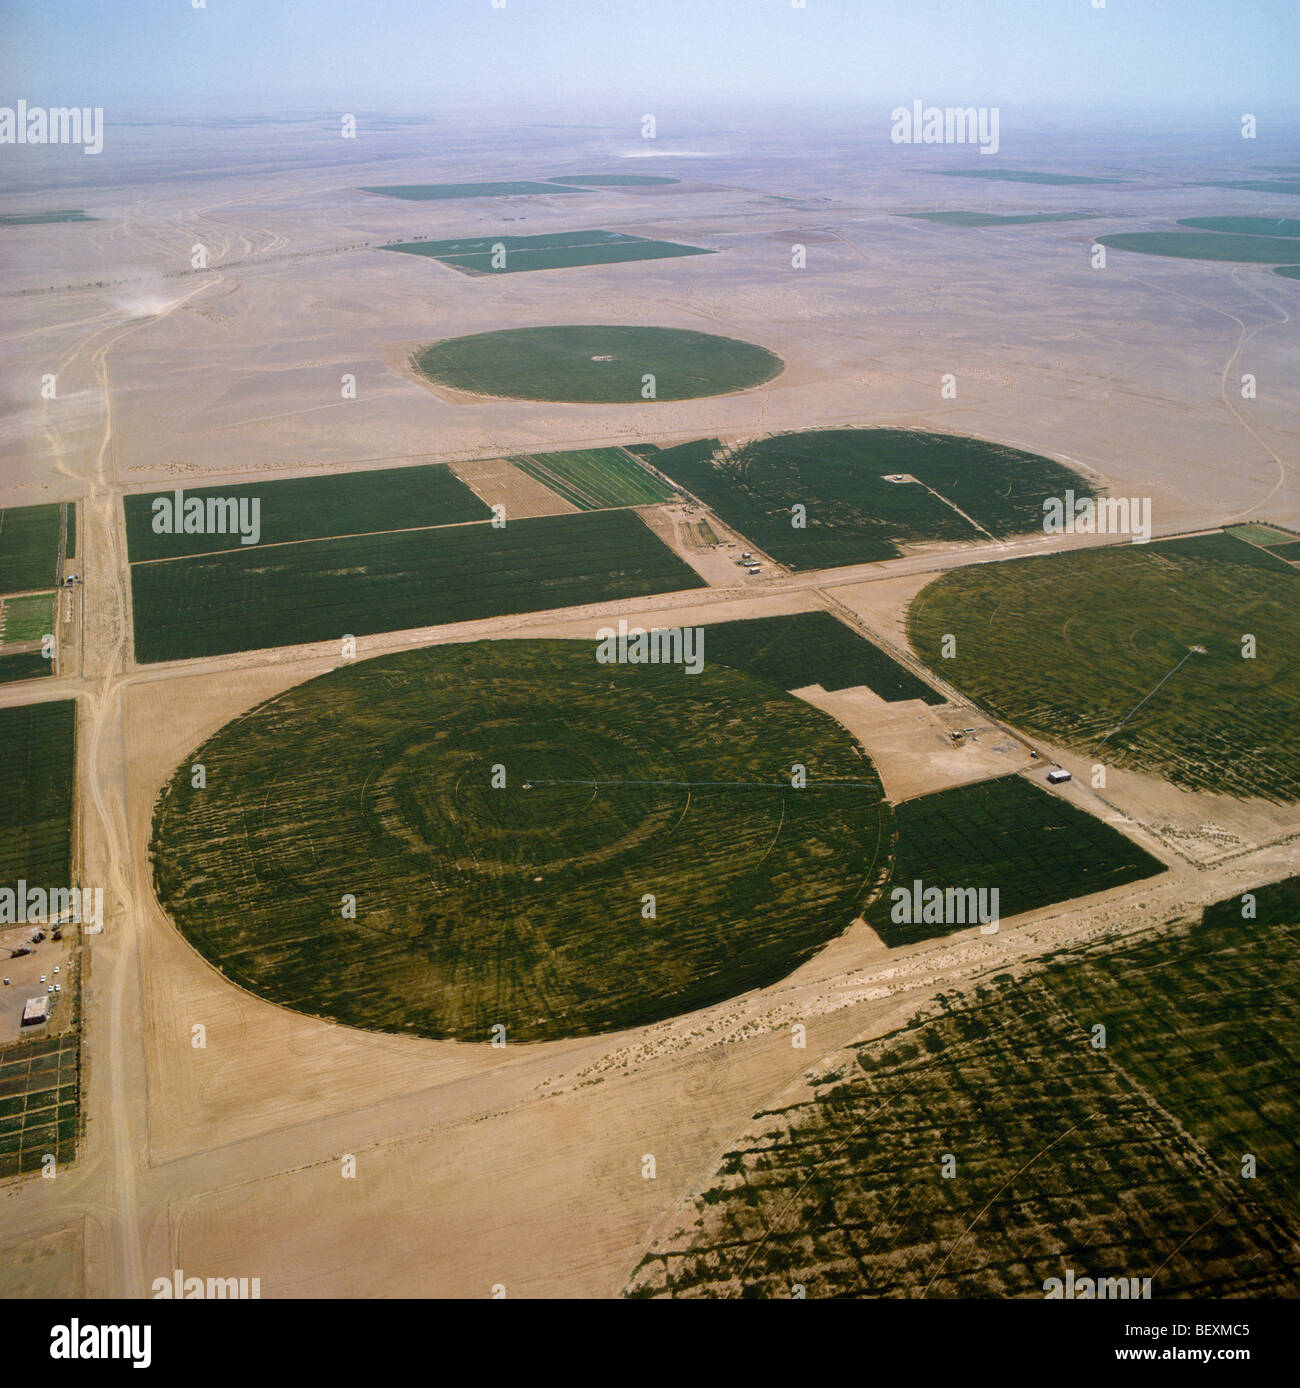 Hail Saudi Arabia Aerial View Of Irrigated Disc Fields Agriculture Stock Photo